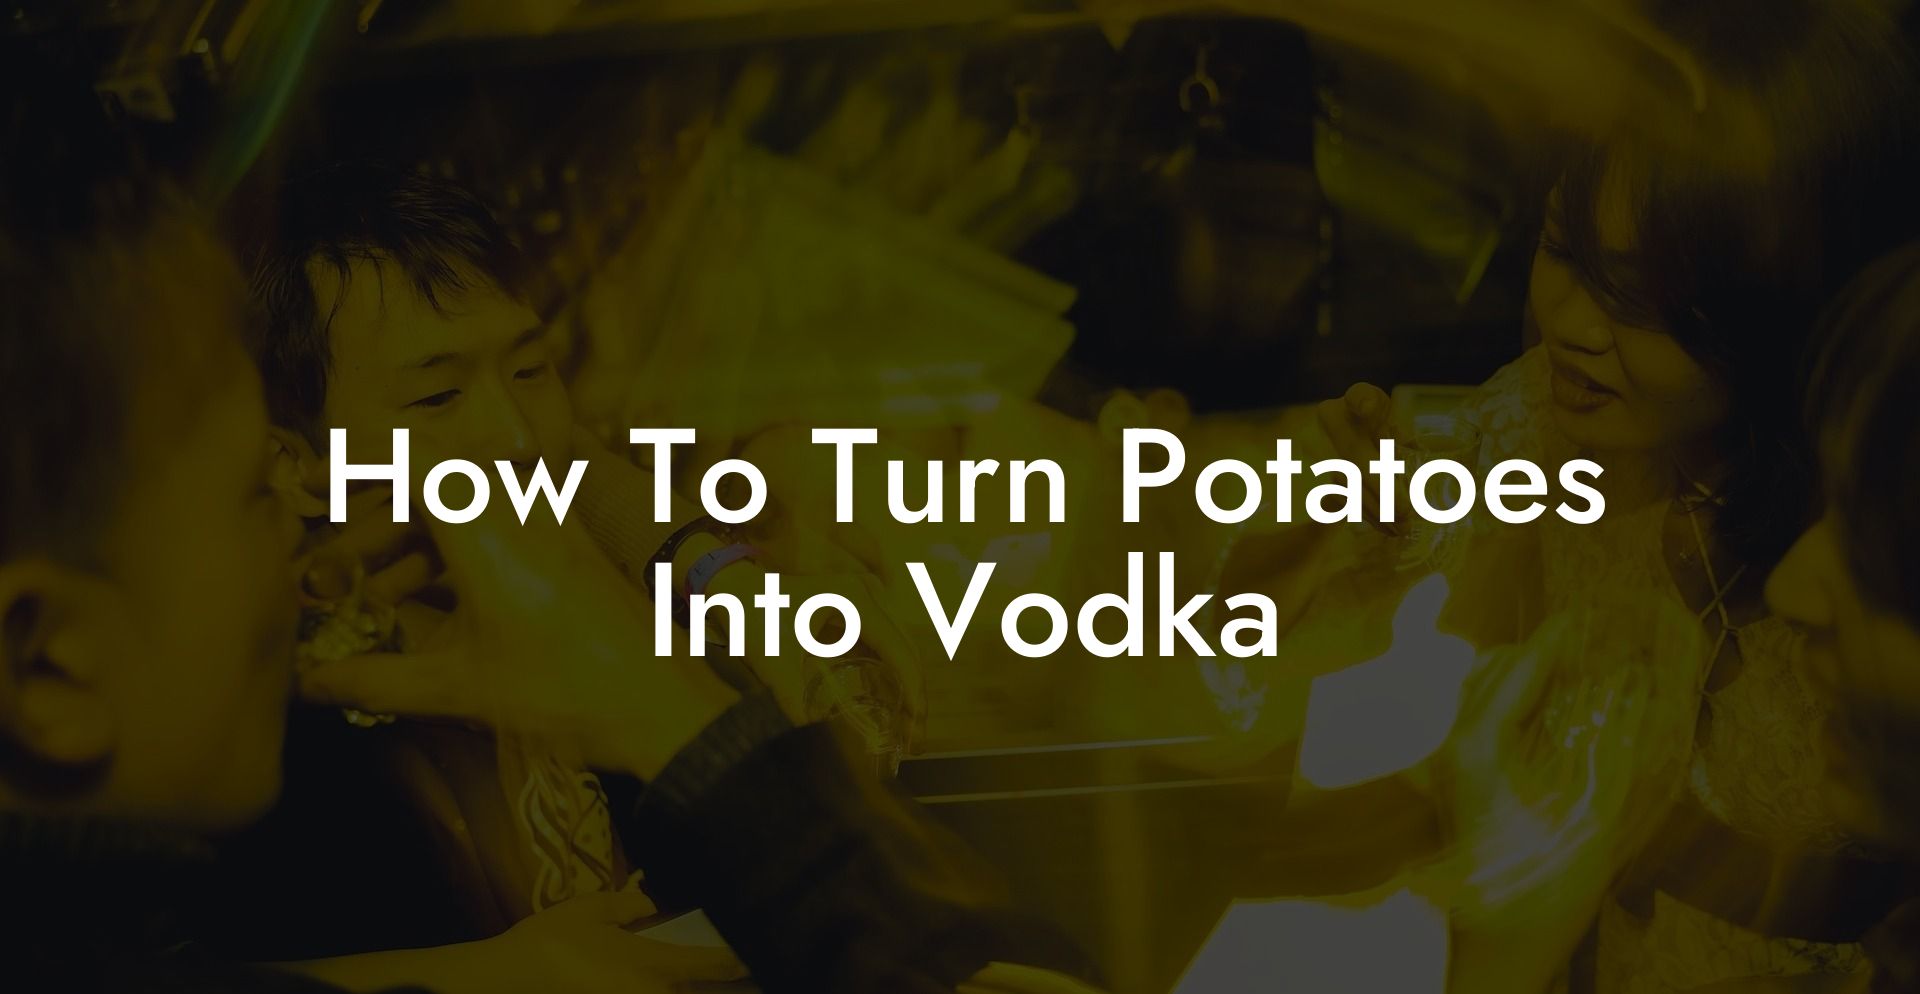 How To Turn Potatoes Into Vodka